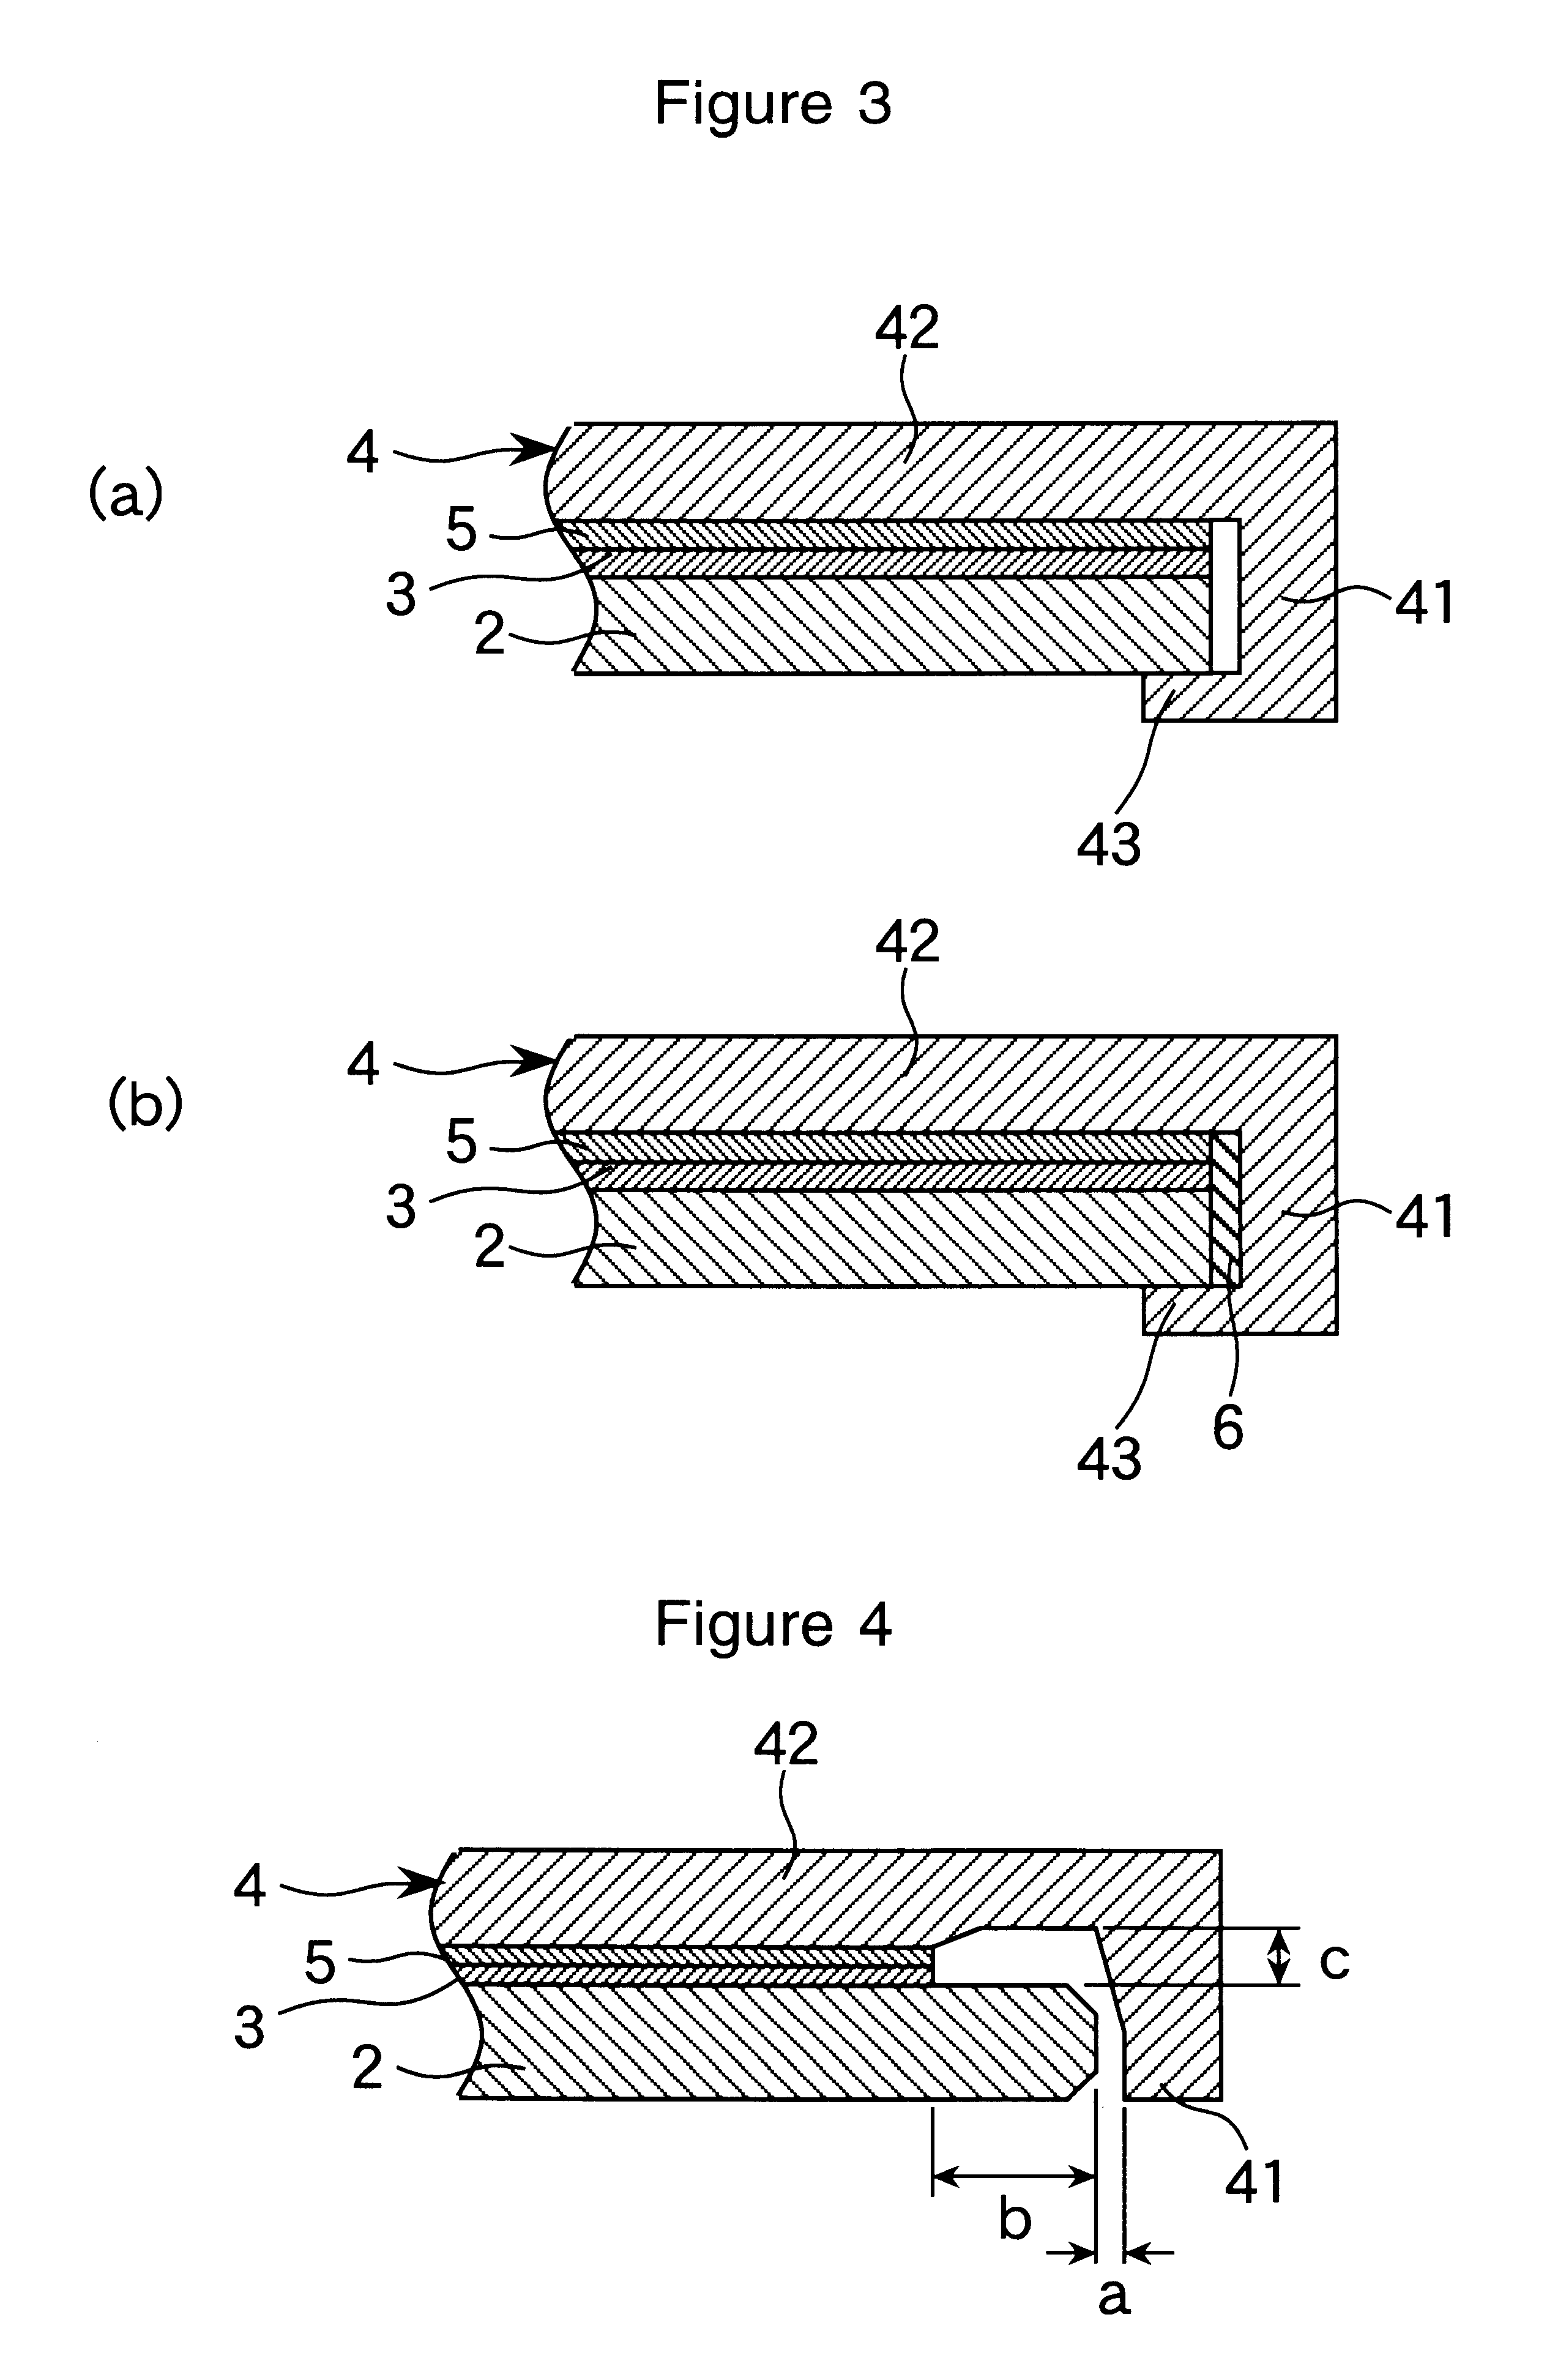 Optical device with protective cover